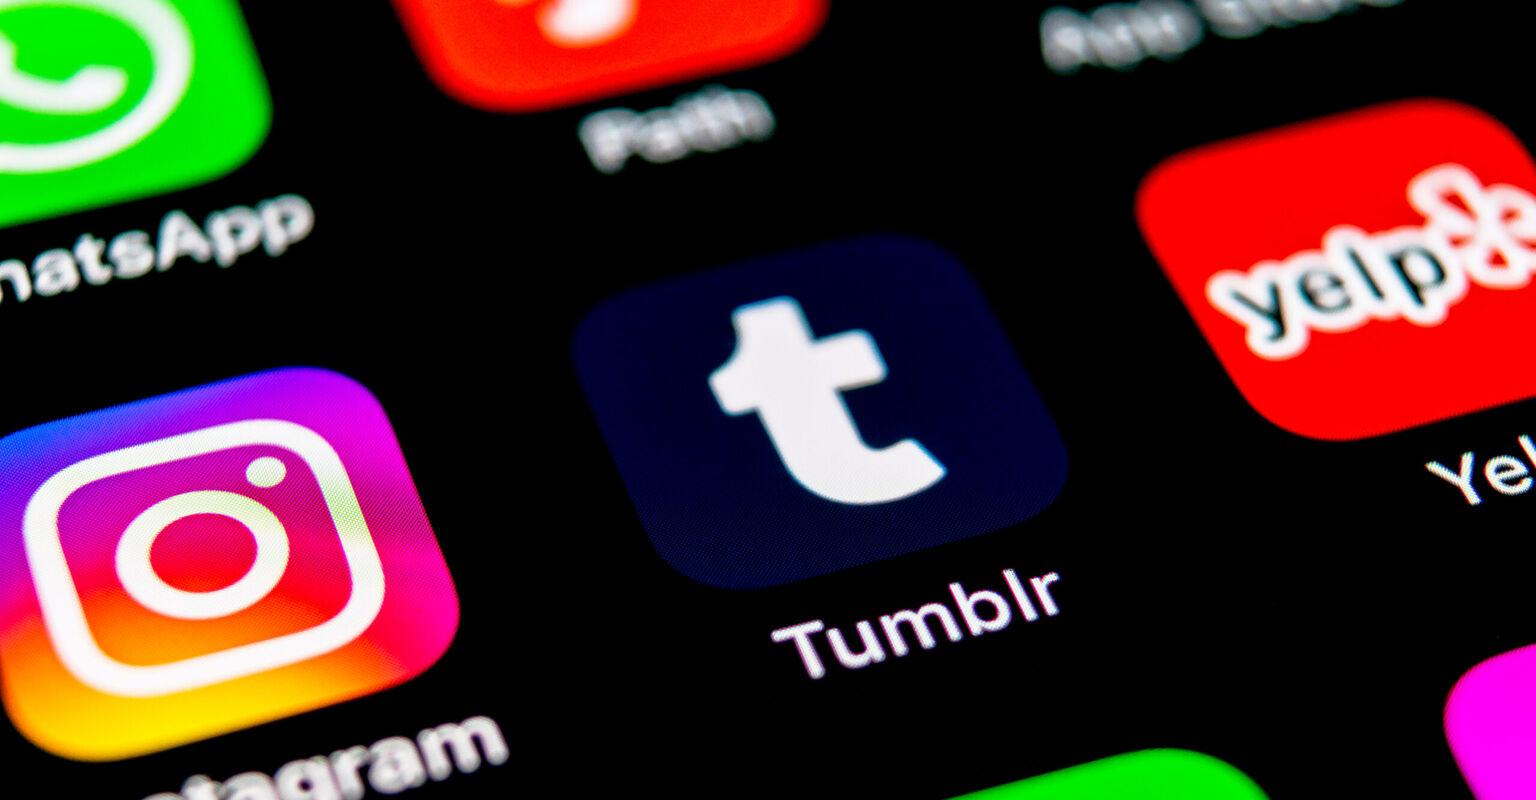 Tumblr (Partially) Reversed Its Nudity Ban - INTO